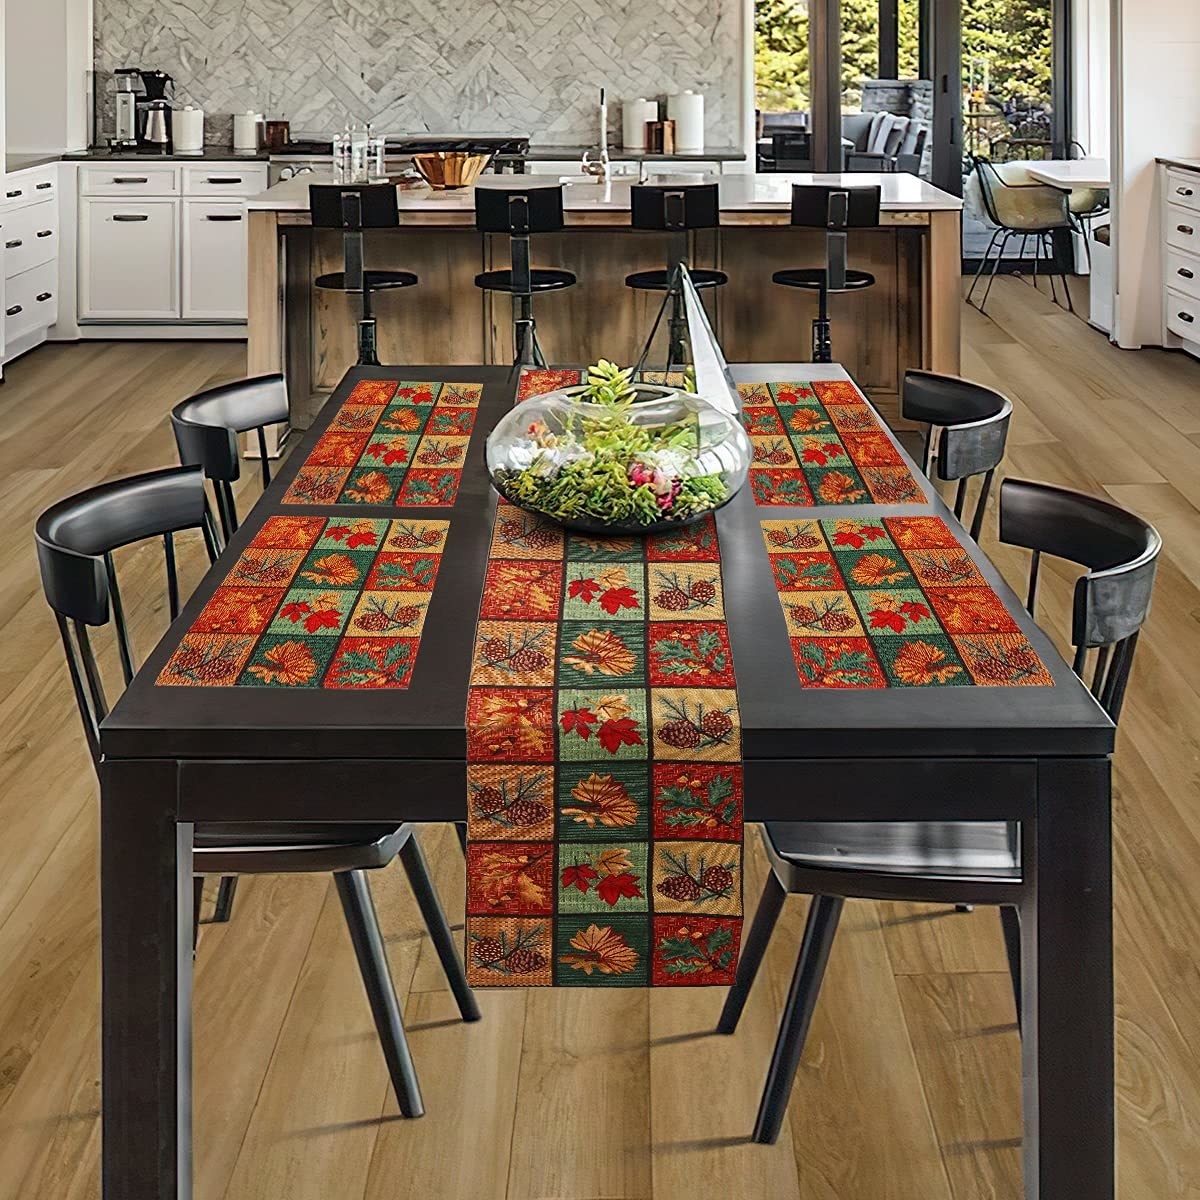 A placemat and table runner set on a table